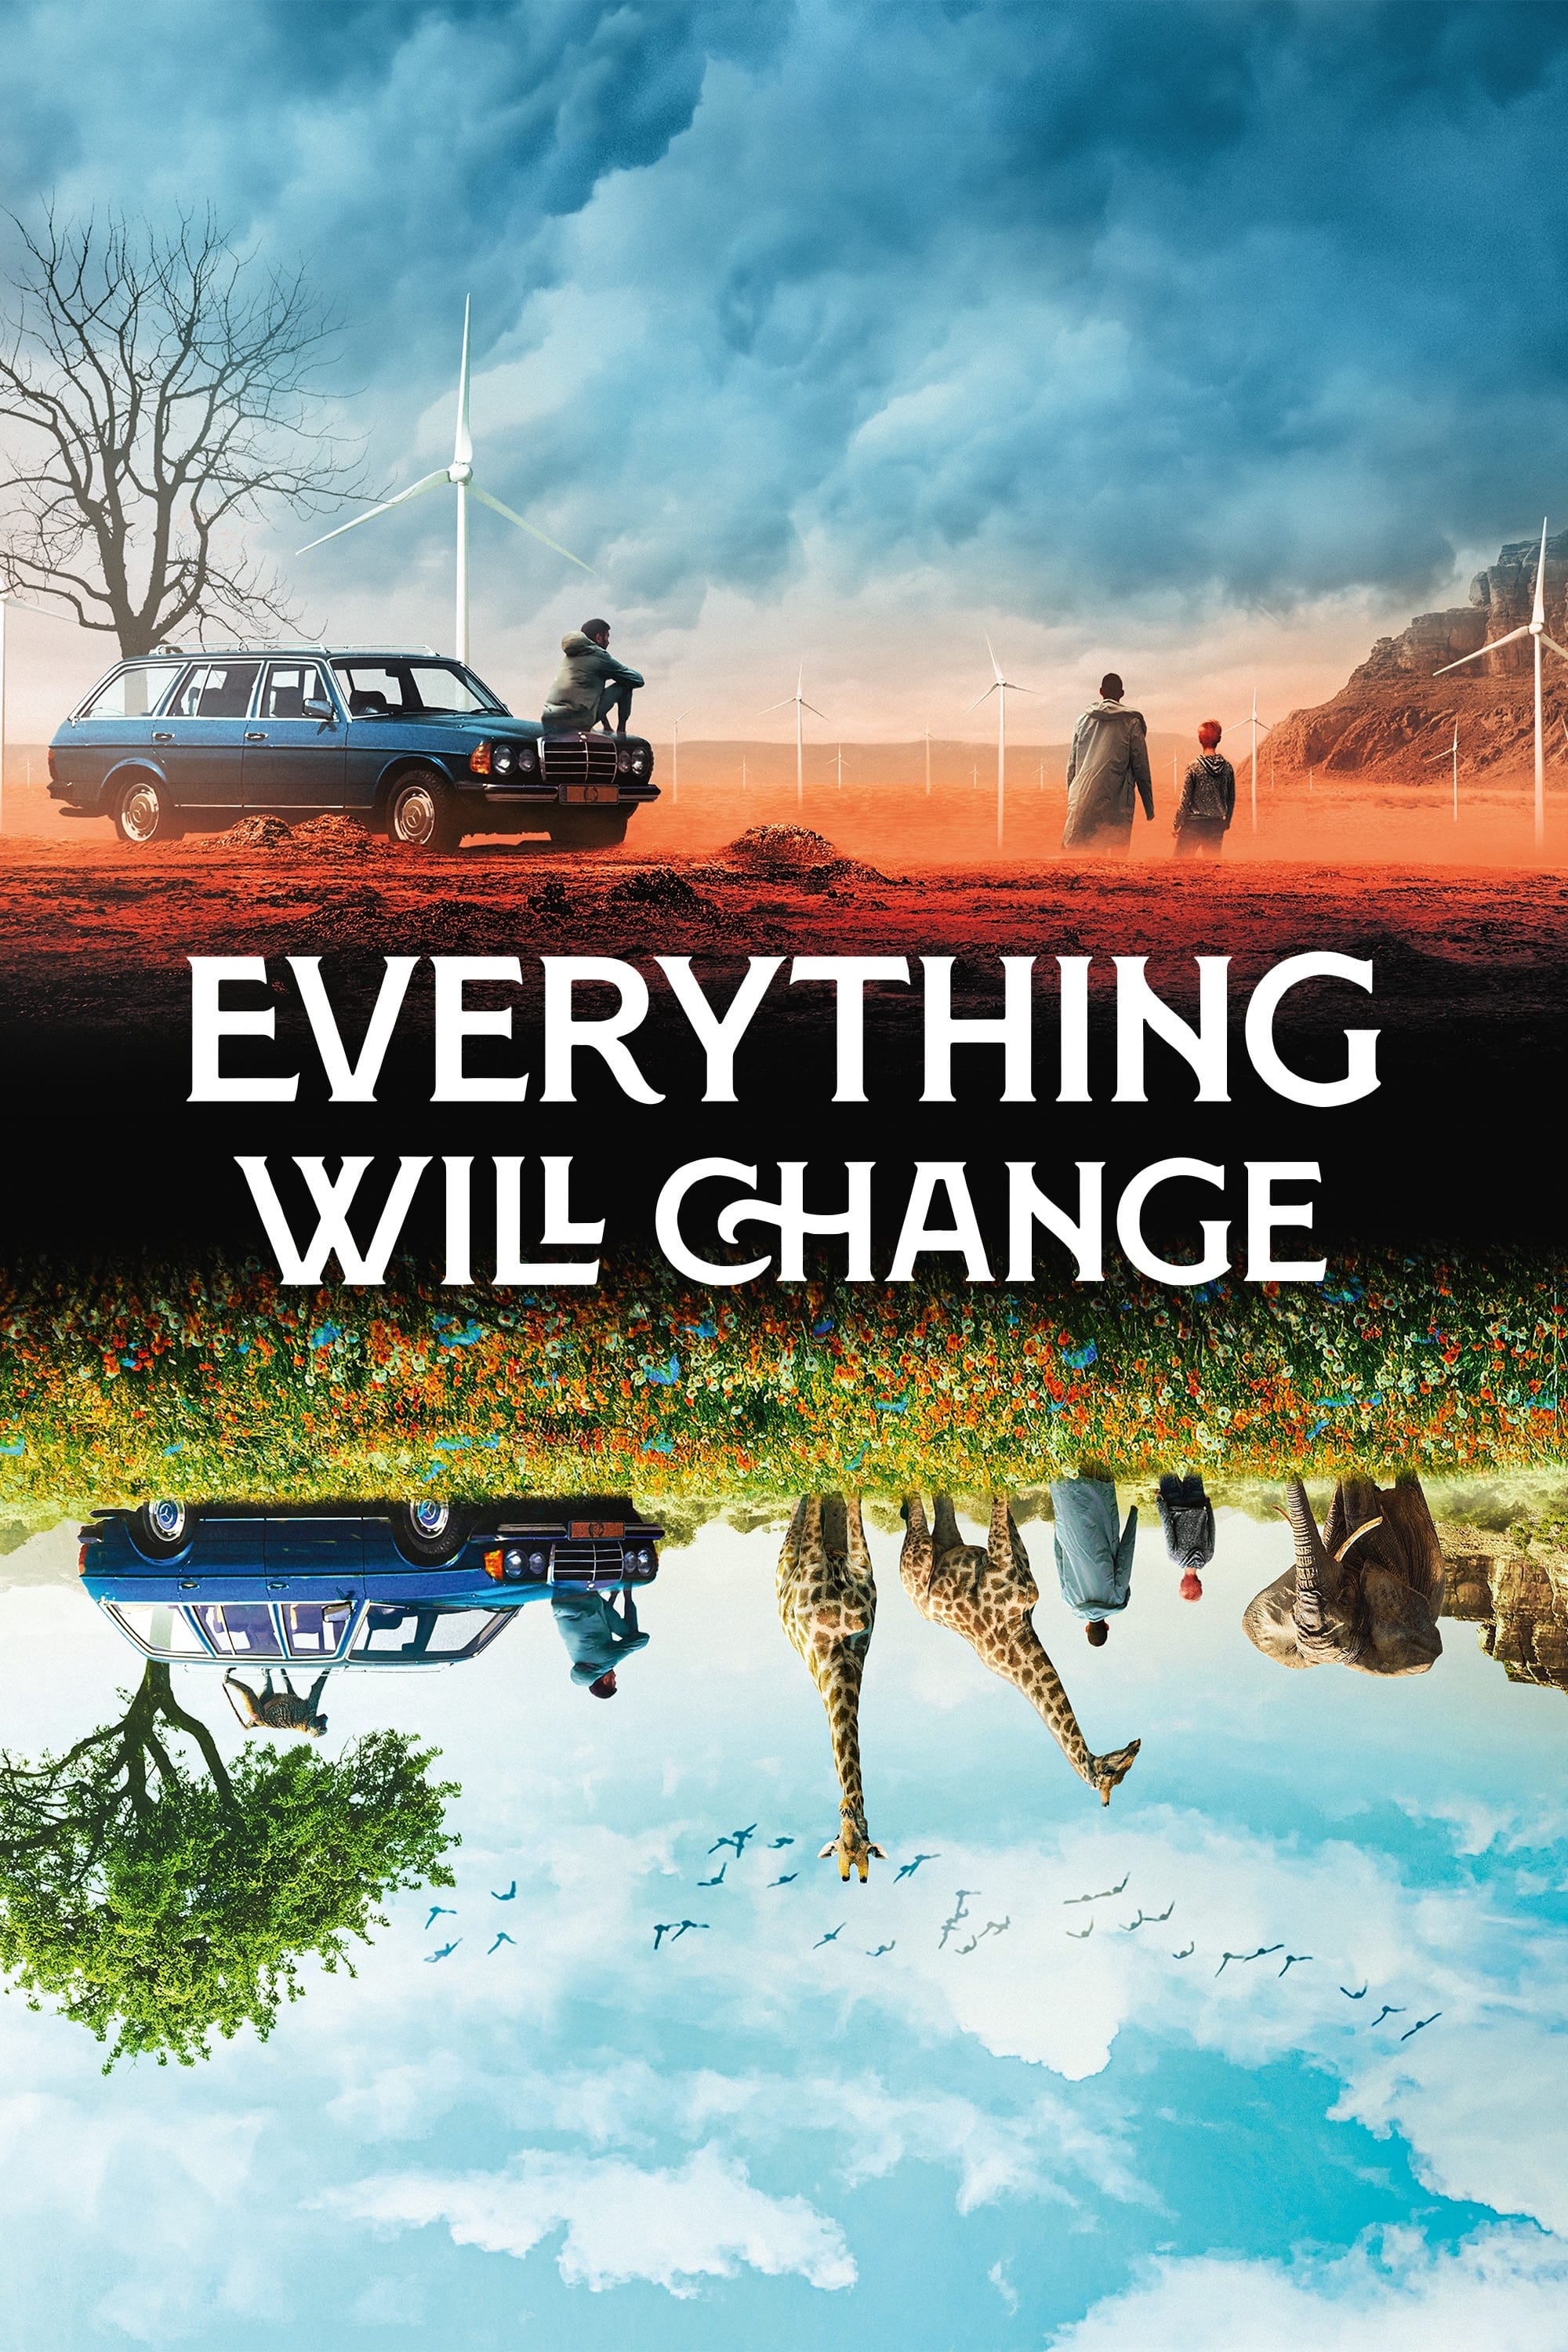 Everything Will Change : Il était une fois 2054